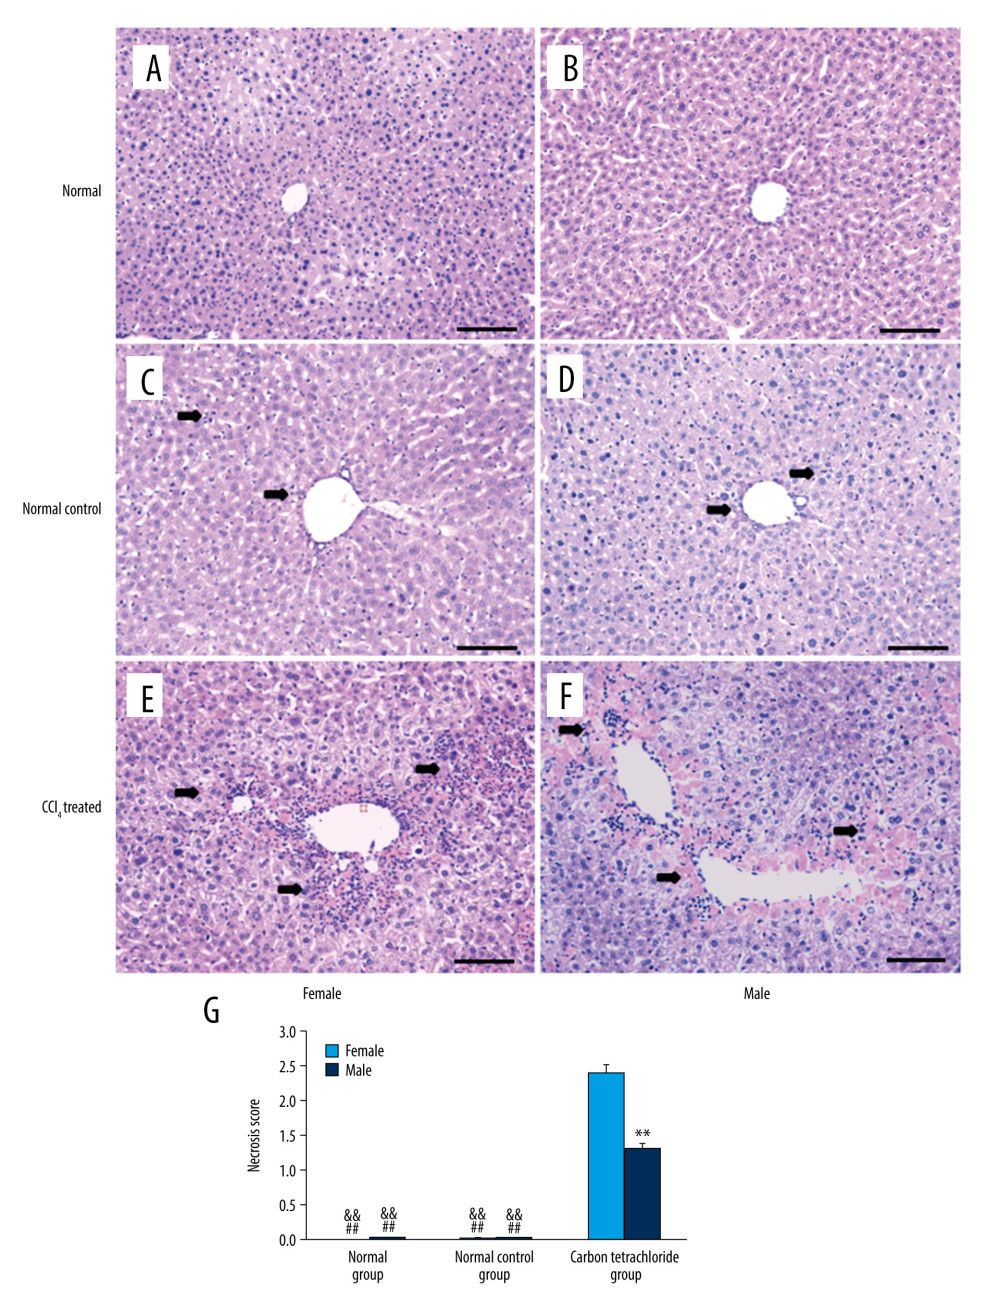 Detection of liver damage in mice by hematoxylin-eosin staining (H&E staining) at 24 h after intraperitoneal injection of CCl4. (A–F) Liver damage of the female normal group, the male normal group, the female normal control group, the male normal control group, the female CCl4 group, and the male CCl4 group, respectively. (G) Area of necrosis. Measurements of liver sections of at least 10 mm2 per mouse were performed using ImagePro Plus 6.0 software. ** P<0.01: there was a significant difference between the female group and the male group. ## P<0.01: there was a significant difference between the female CCl4 group and the normal group or the normal control group. && P<0.01: there was a significant difference between the male CCl4 group and the normal group or the normal control group. Experiments were repeated in triplicate (scale bar, 50 μm). H&E – hematoxylin and eosin.